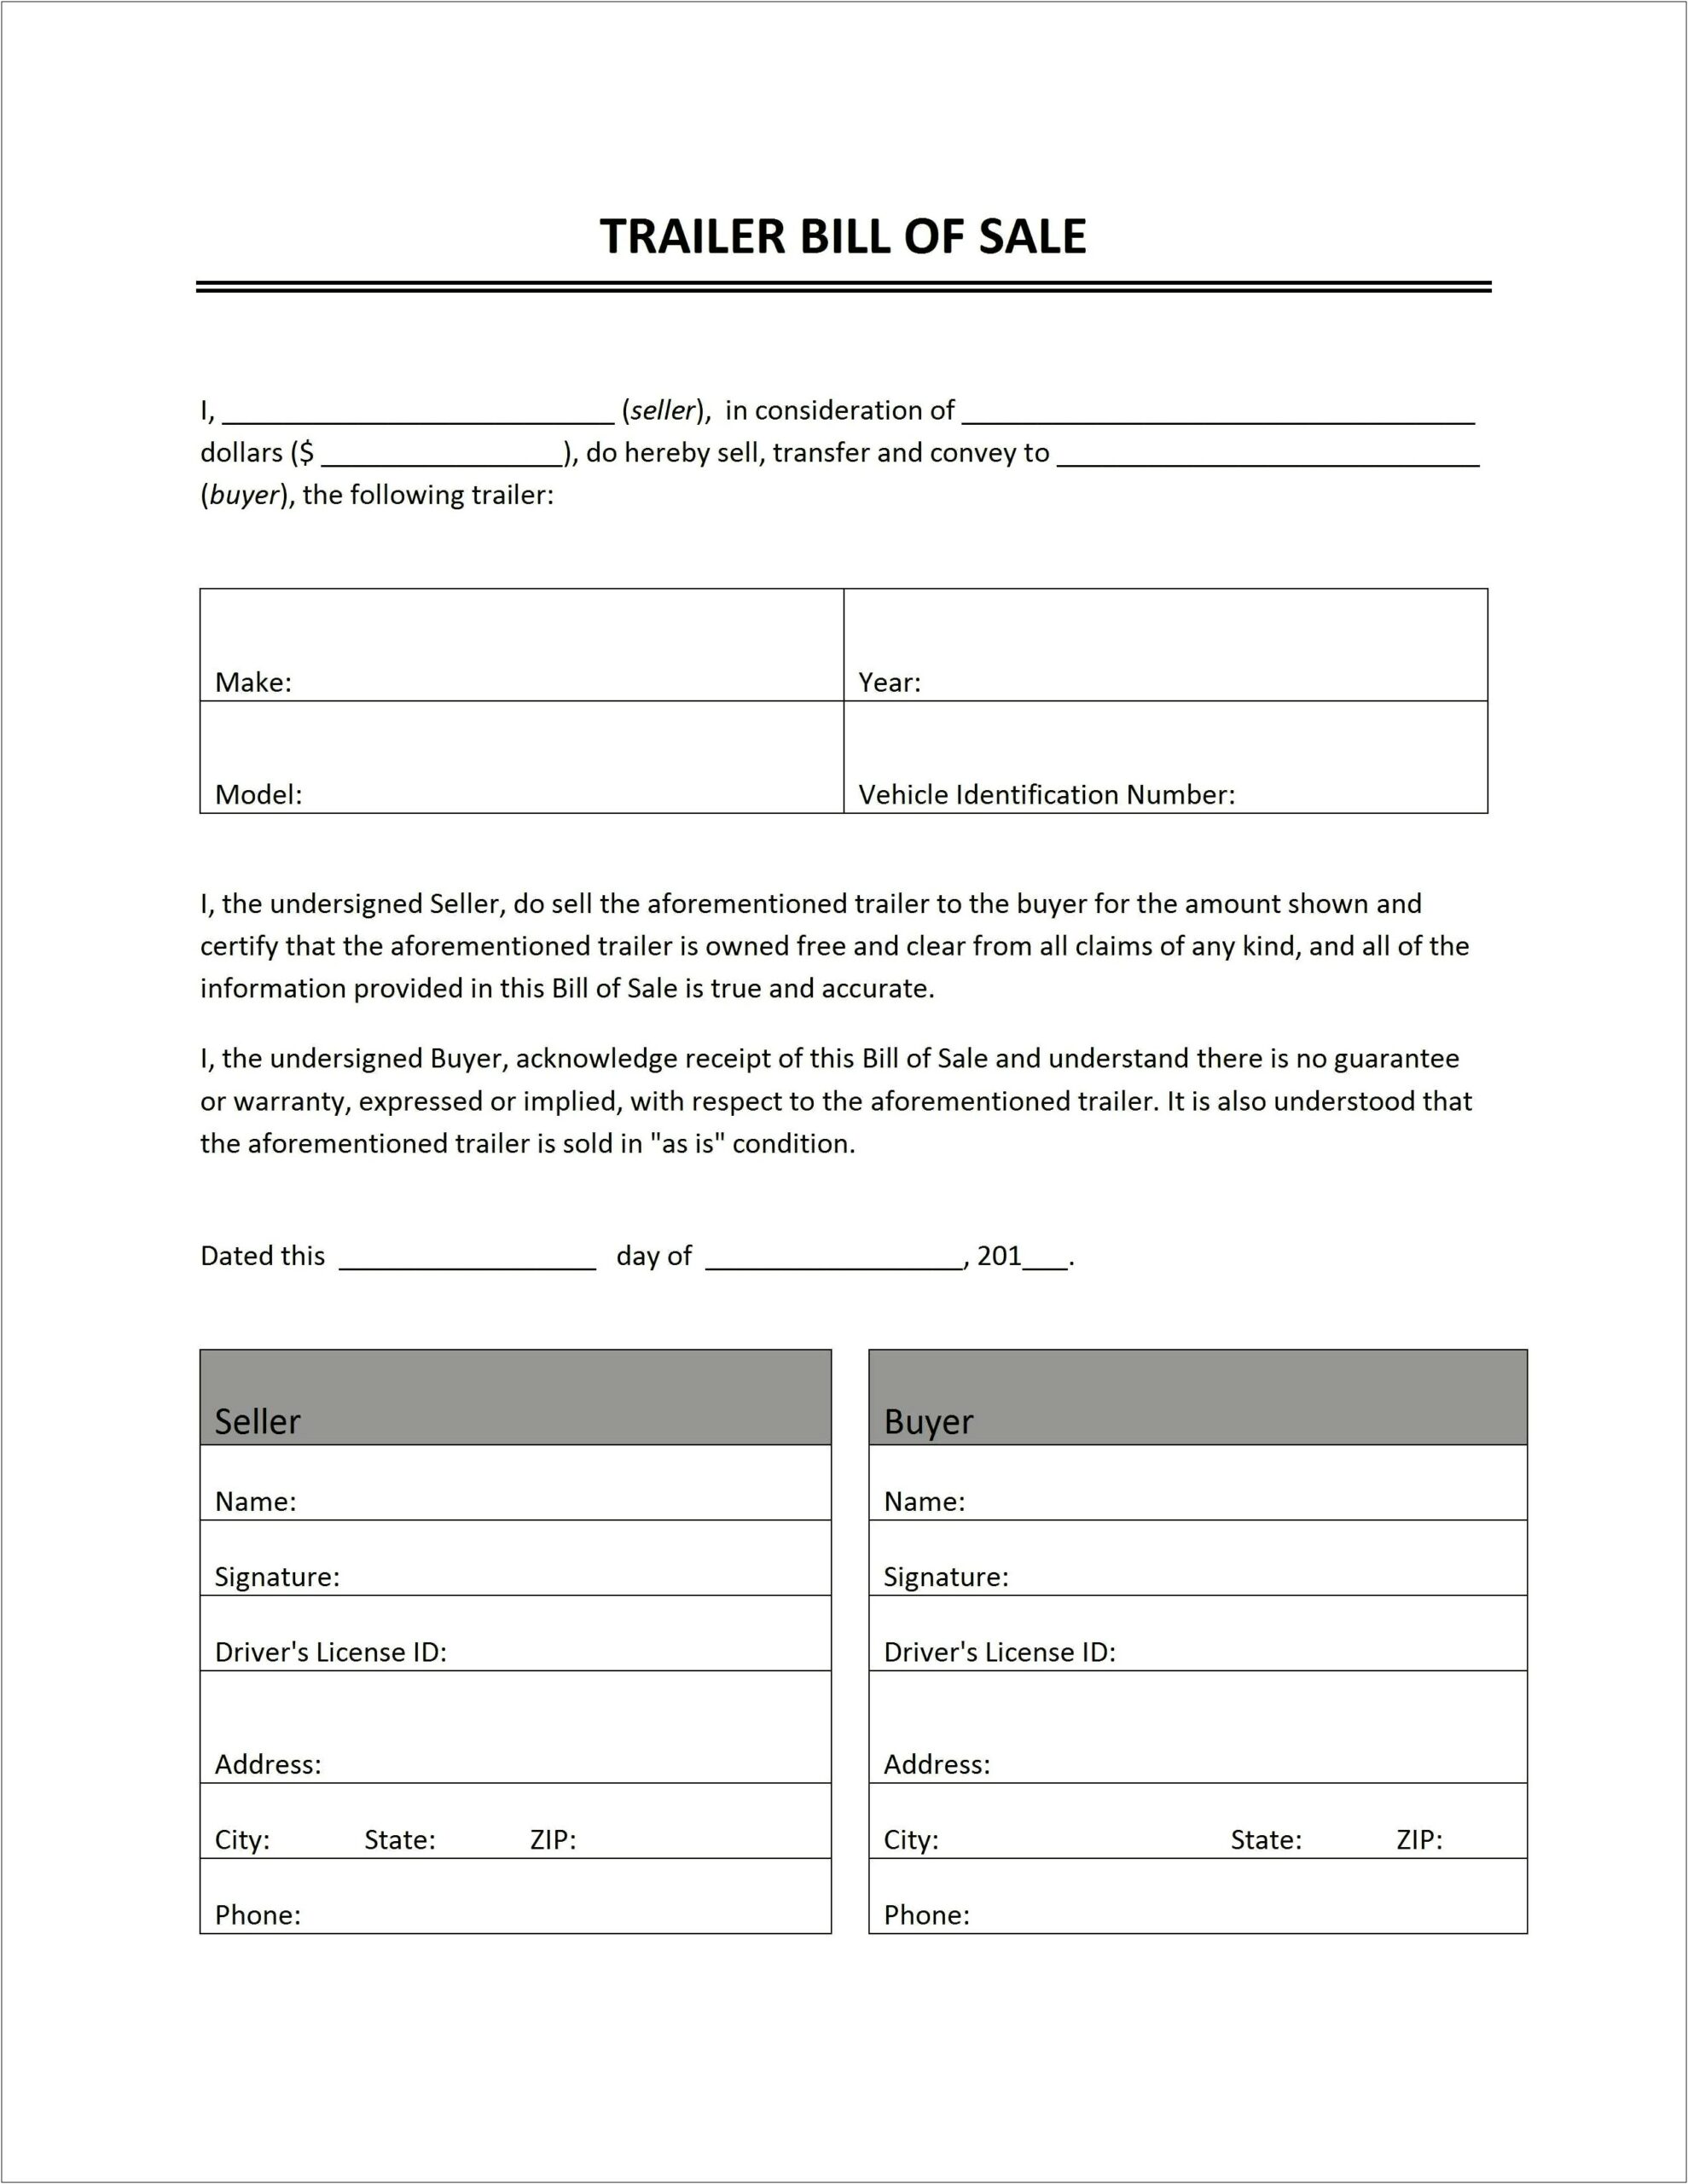 Free Templates For Bill Of Sale For Trailers